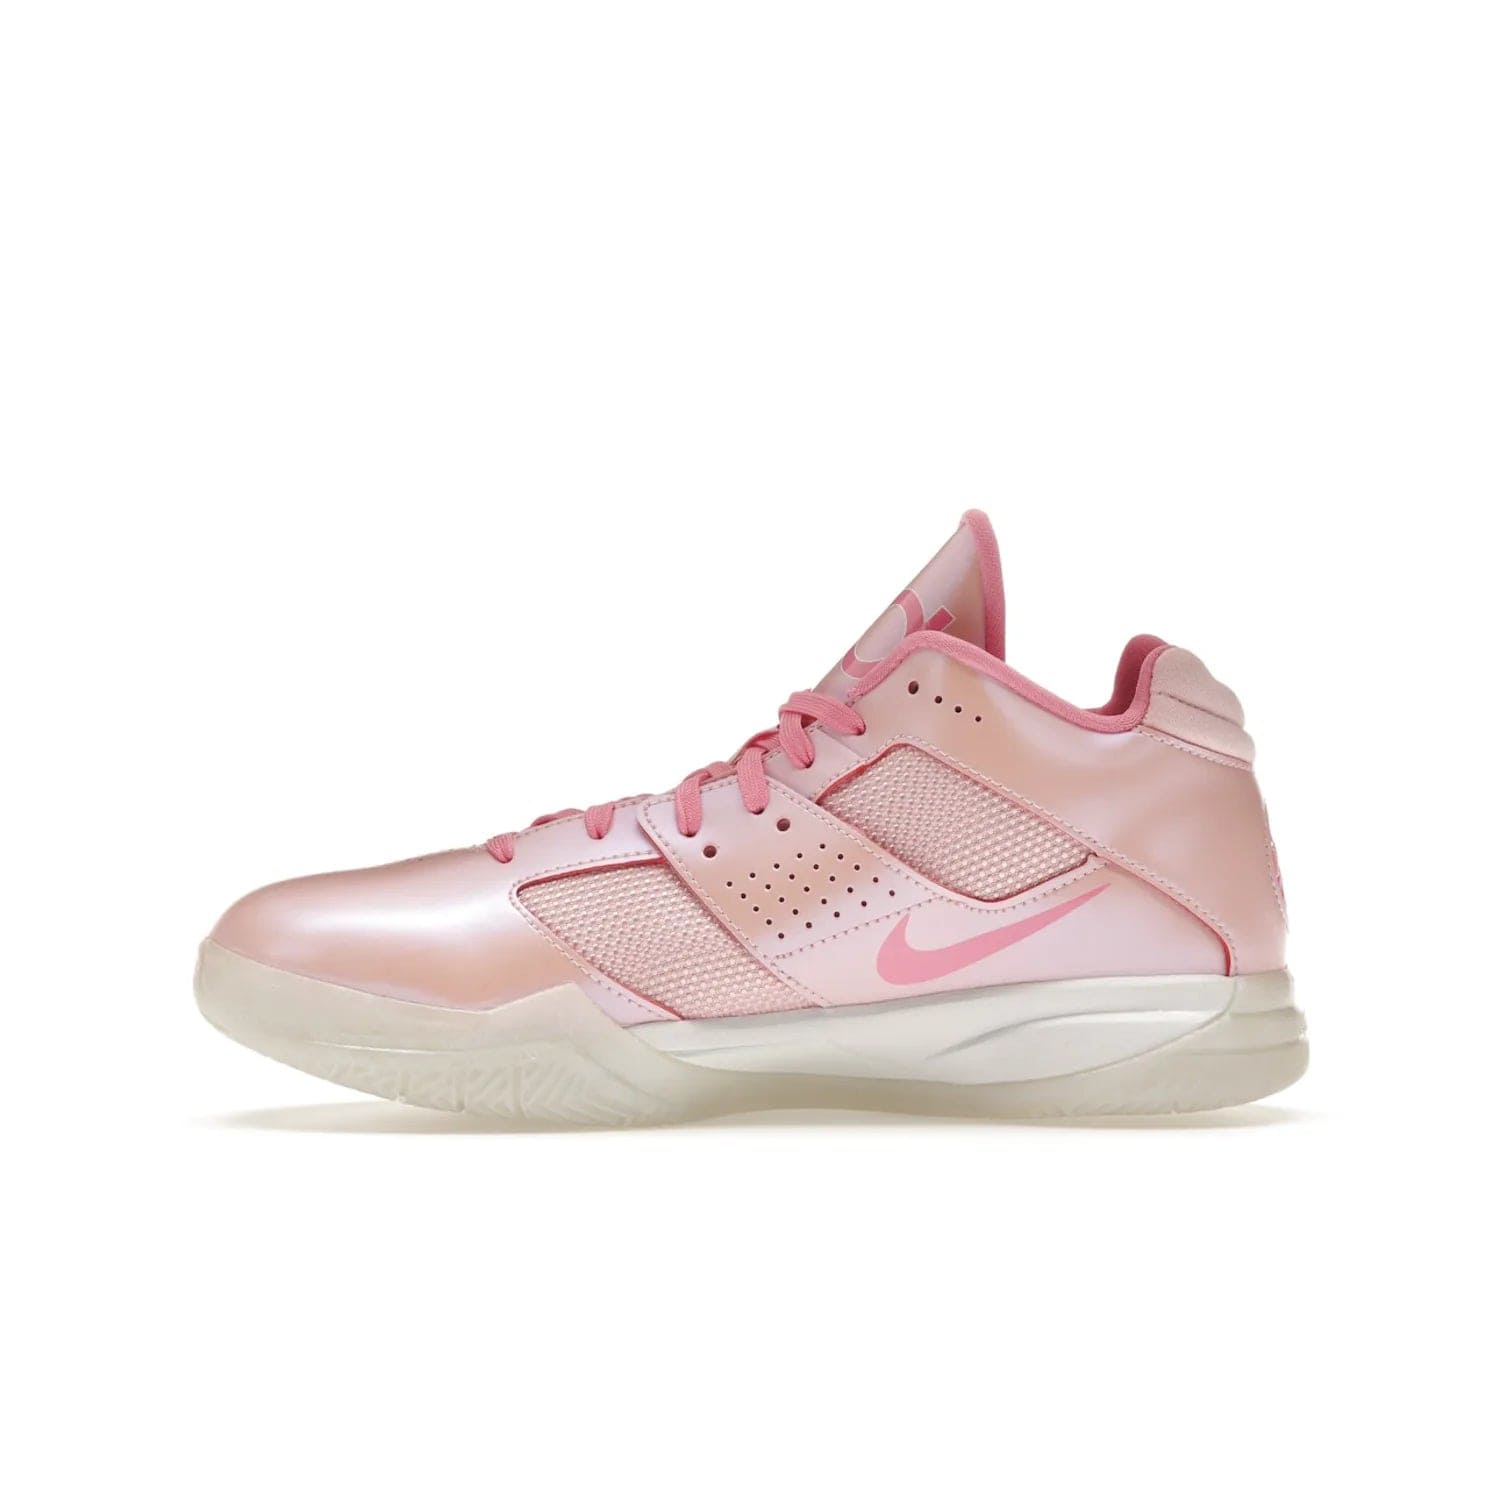 Nike KD 3 Aunt Pearl - Image 19 - Only at www.BallersClubKickz.com - Introducing the Nike KD 3 Aunt Pearl. Featuring a bold Medium Soft Pink, White, & Lotus Pink colorway. Get ready to stand out this October 15th.